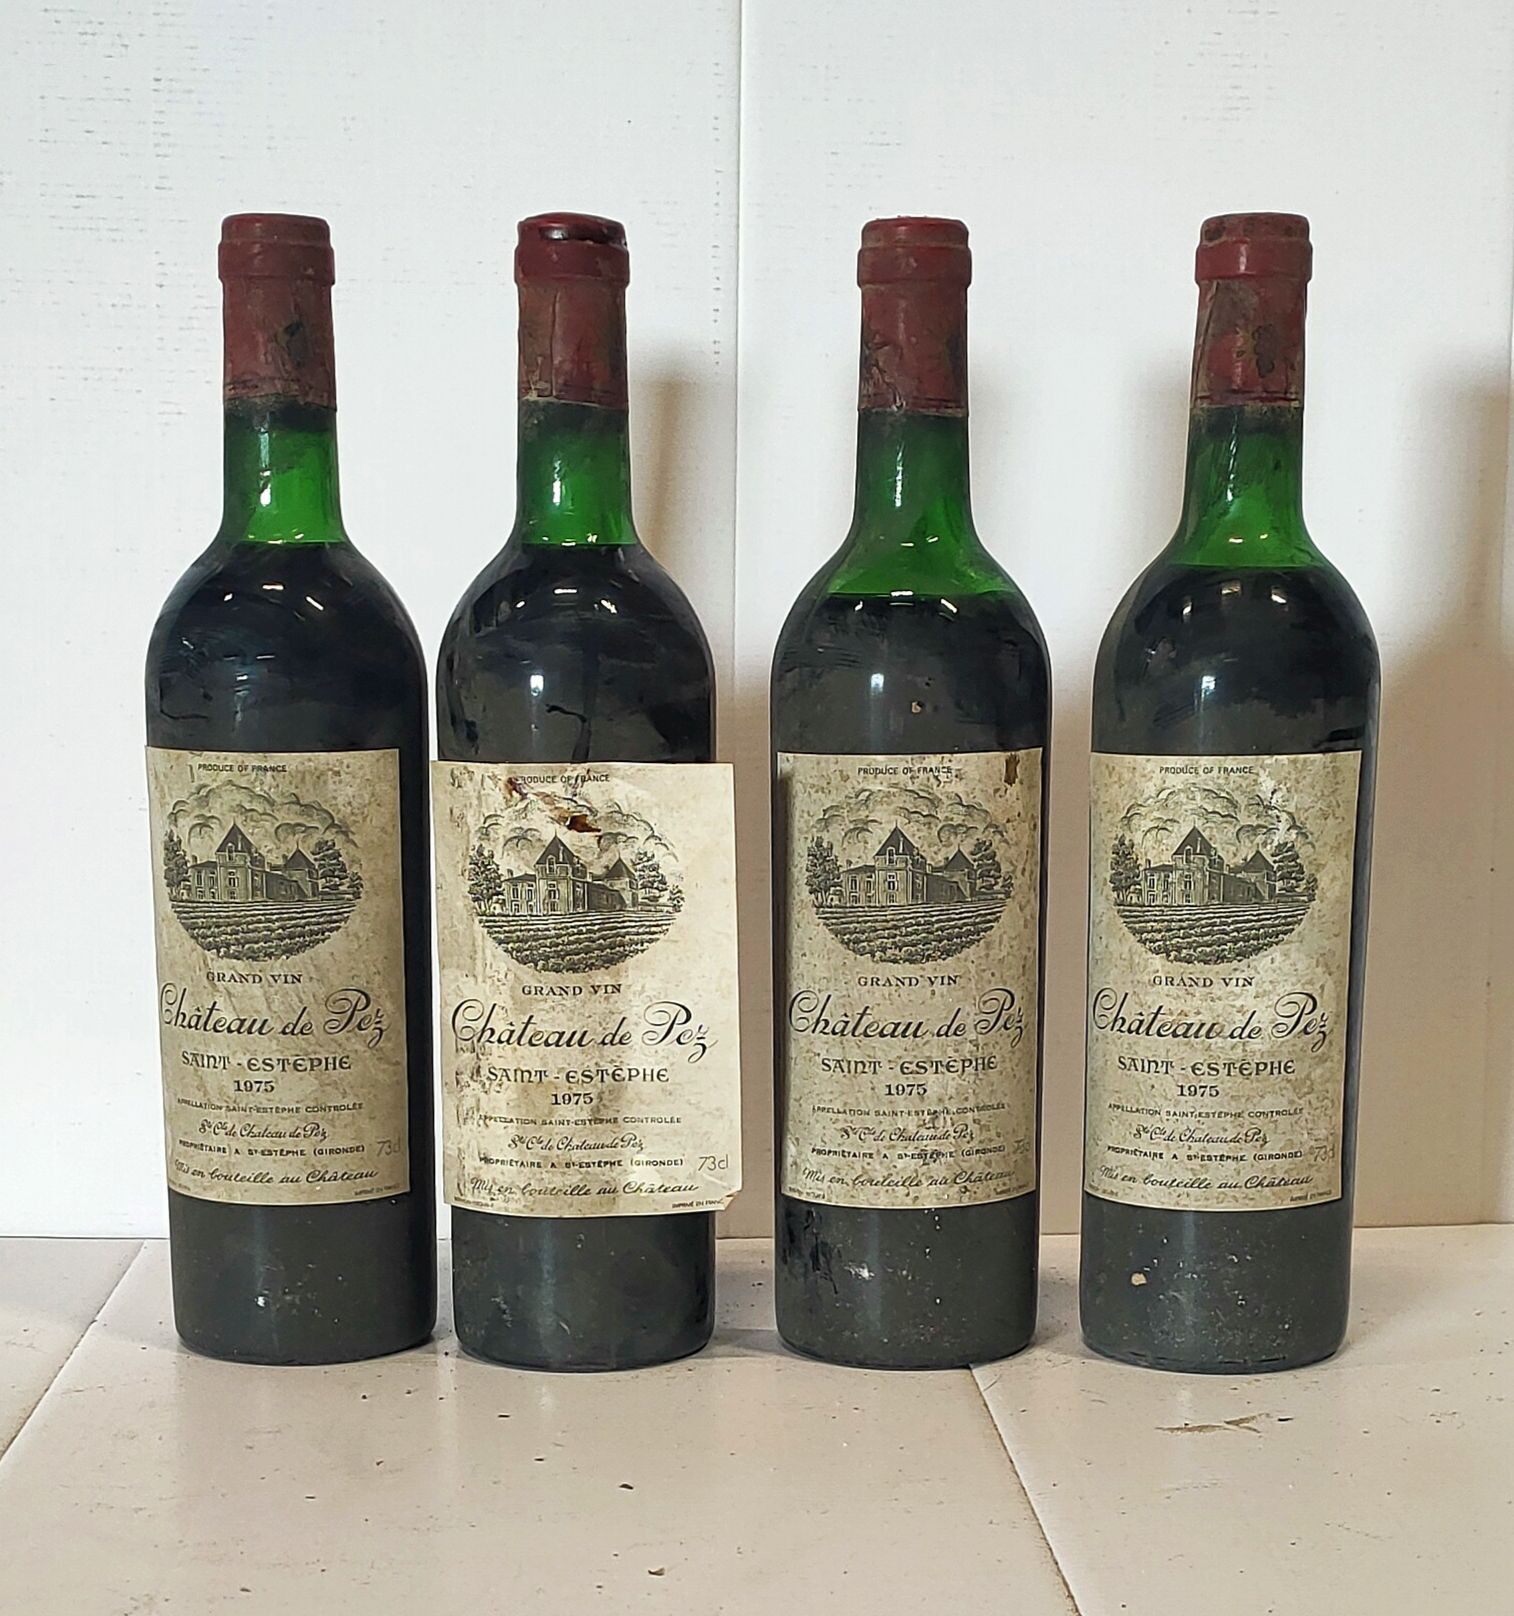 Null 4 bottles

Château de PEZ

1975

Stained and slightly damaged labels. 2 lev&hellip;